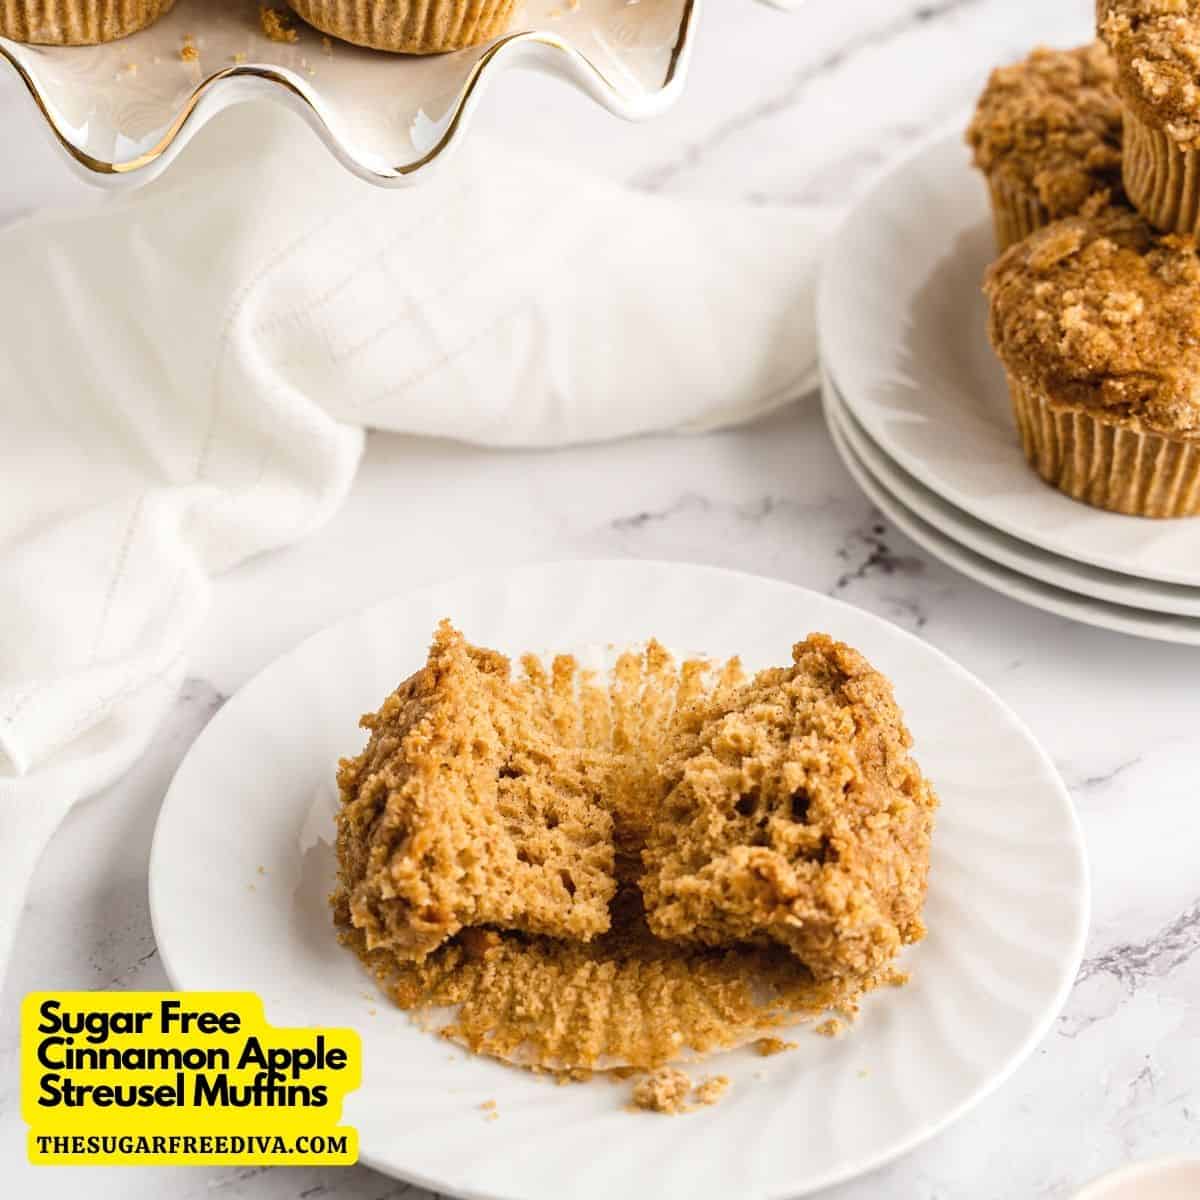 Sugar Free Cinnamon Apple Streusel Muffins, a delicious recipe for apple cinnamon muffins with streusel topping made with no added sugar.